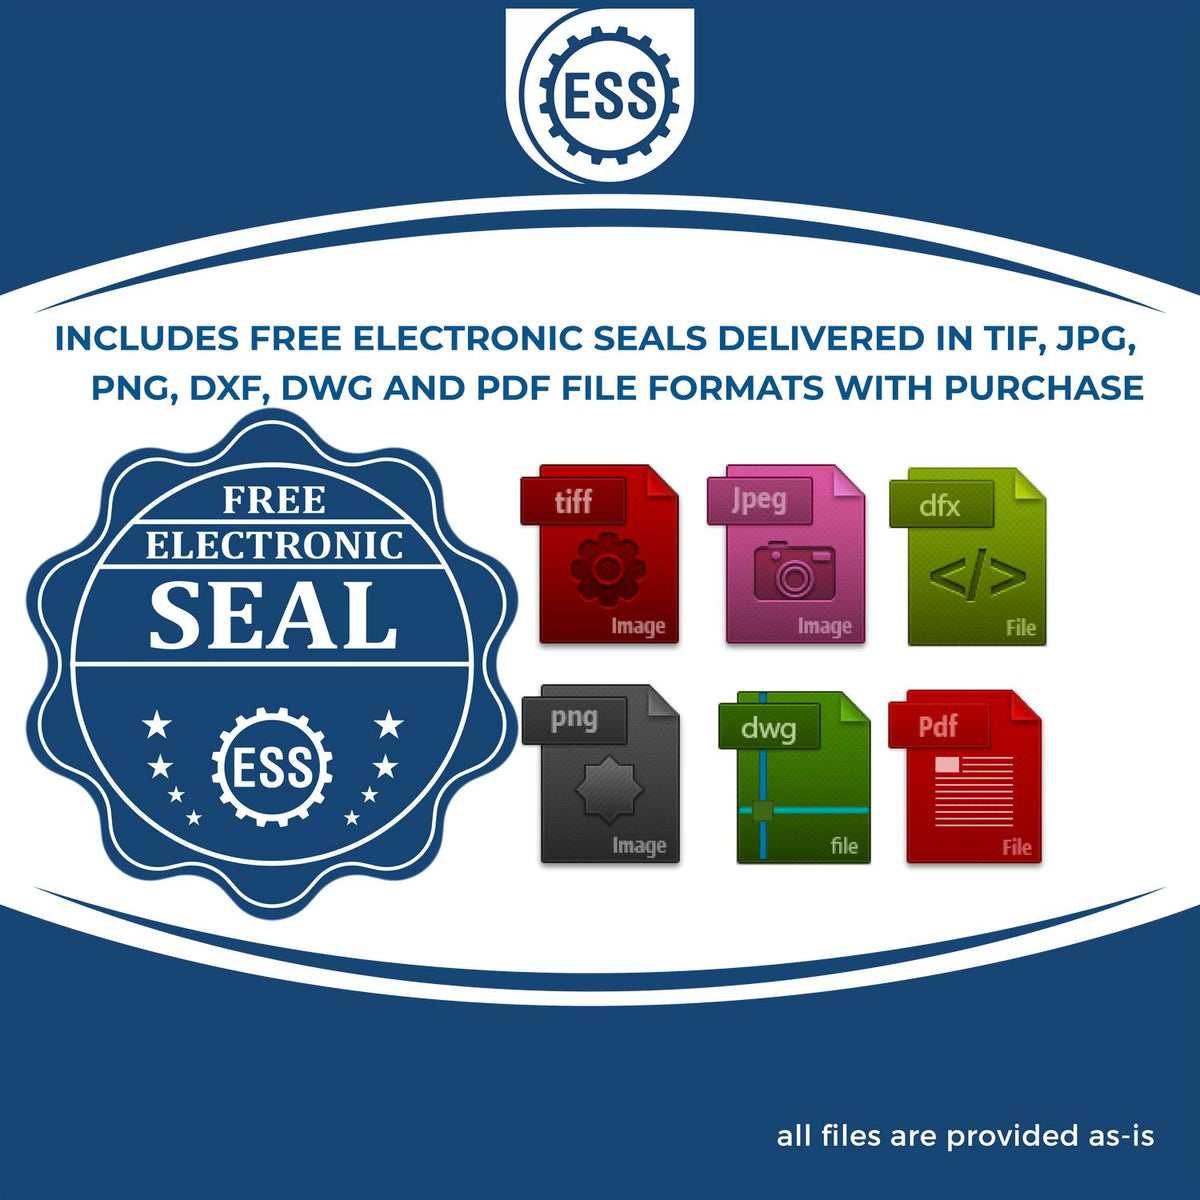 An infographic for the free electronic seal for the State of North Carolina Soft Land Surveyor Embossing Seal illustrating the different file type icons such as DXF, DWG, TIF, JPG and PNG.